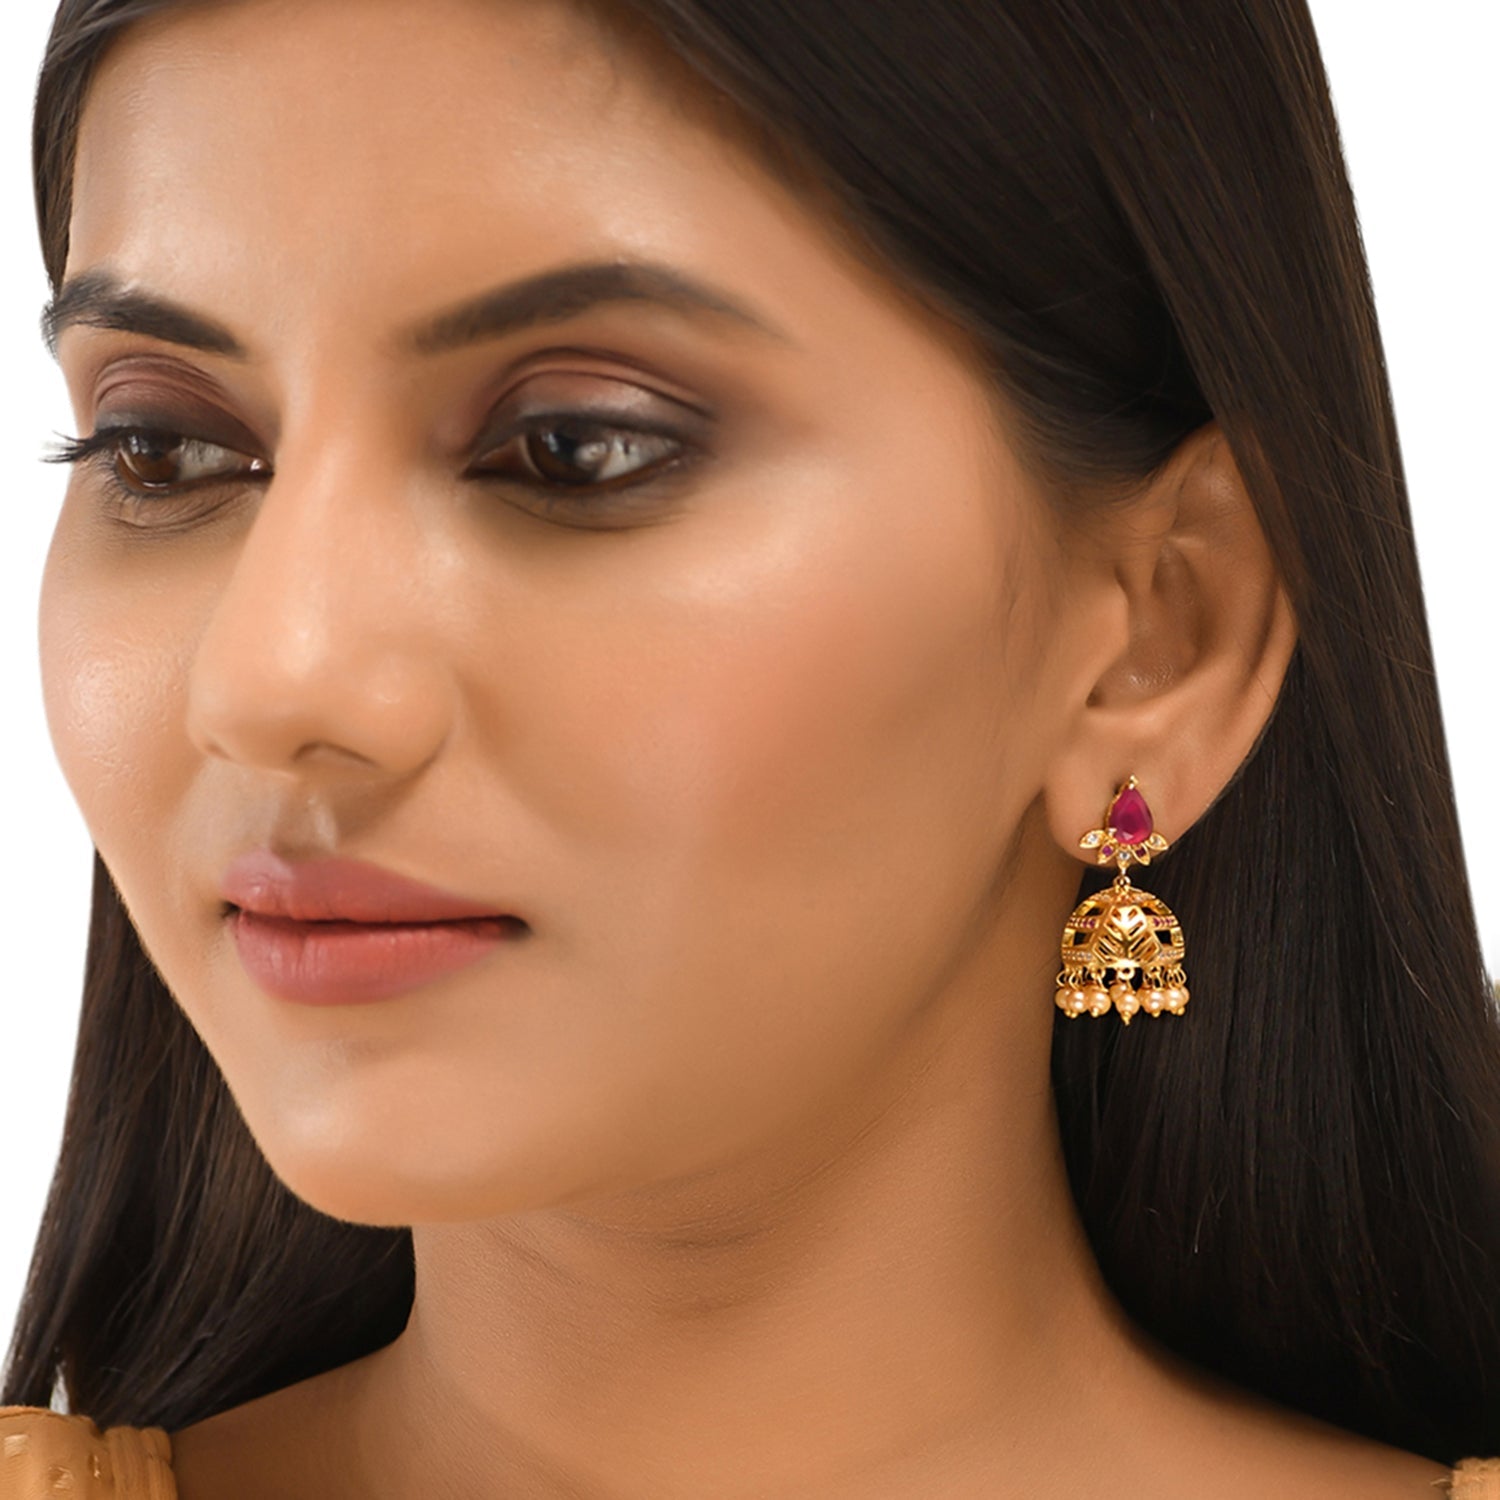 Women's Cz Traditional Gold Plated Red & White Jhumka Earrings - Voylla